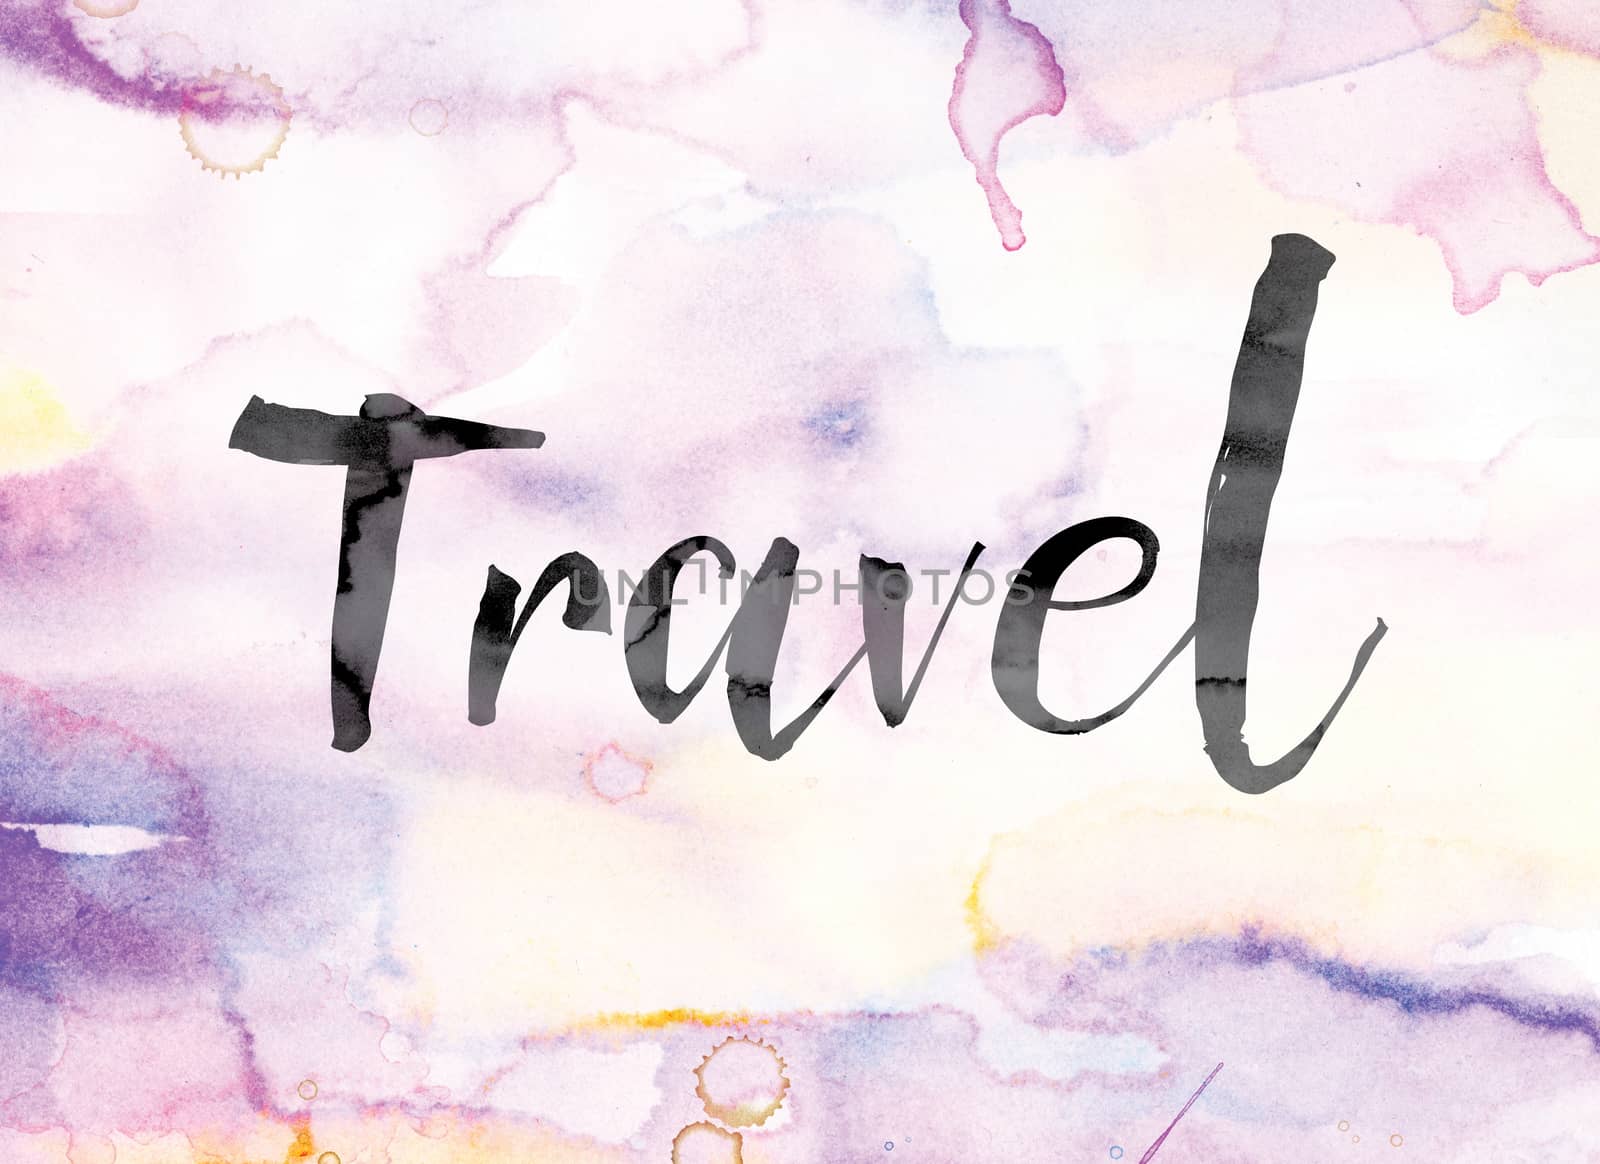 The word "Travel" painted in black ink over a colorful watercolor washed background concept and theme.